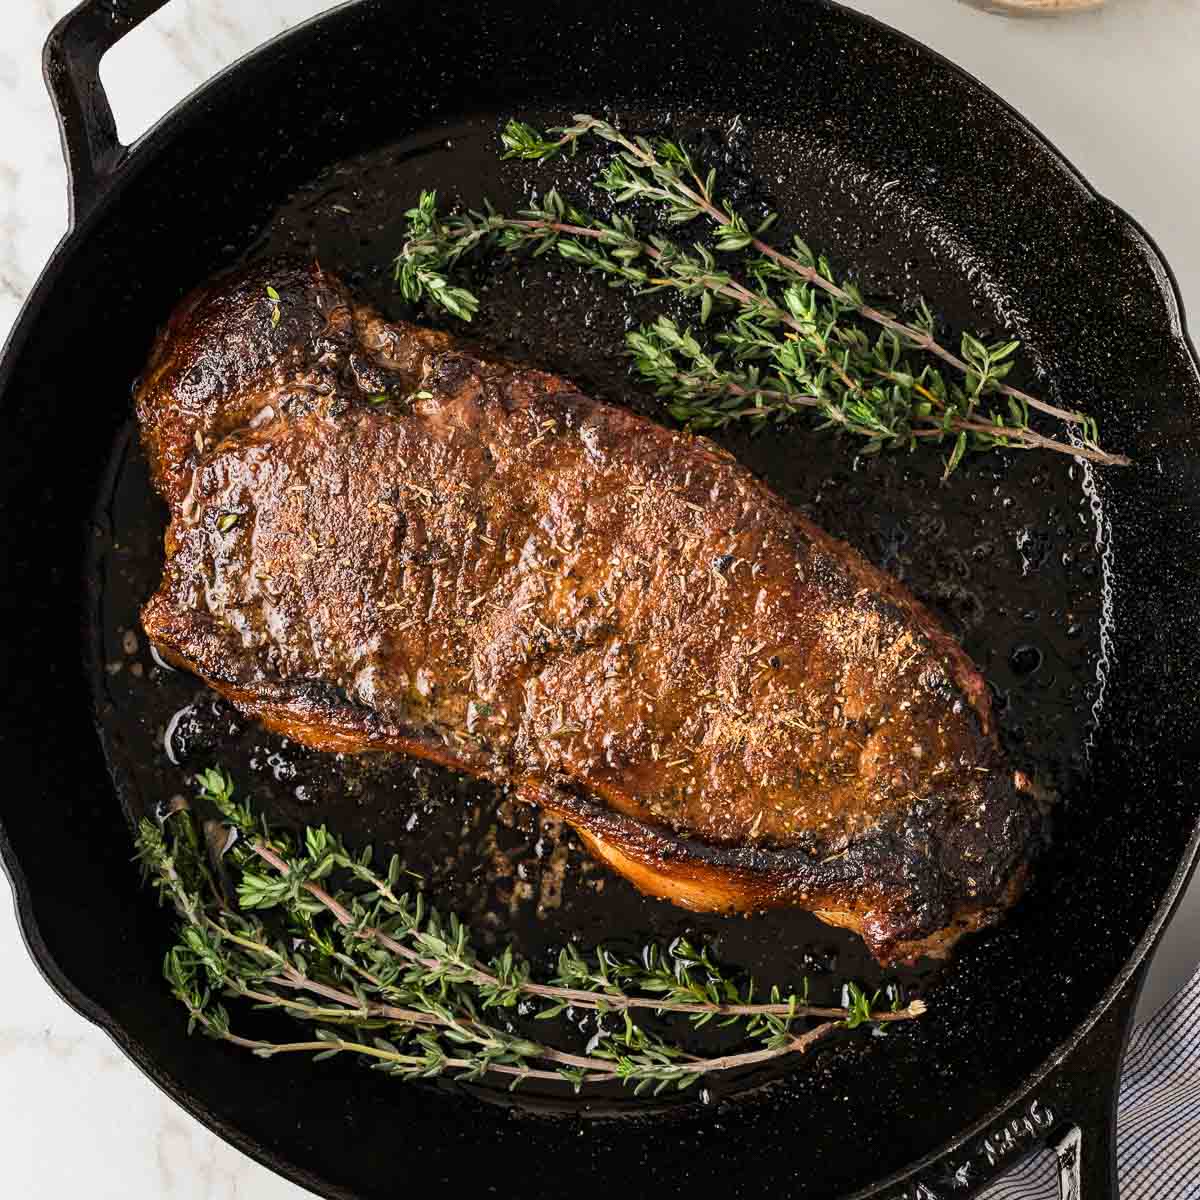 A blackened steak in a cast iron skillet.